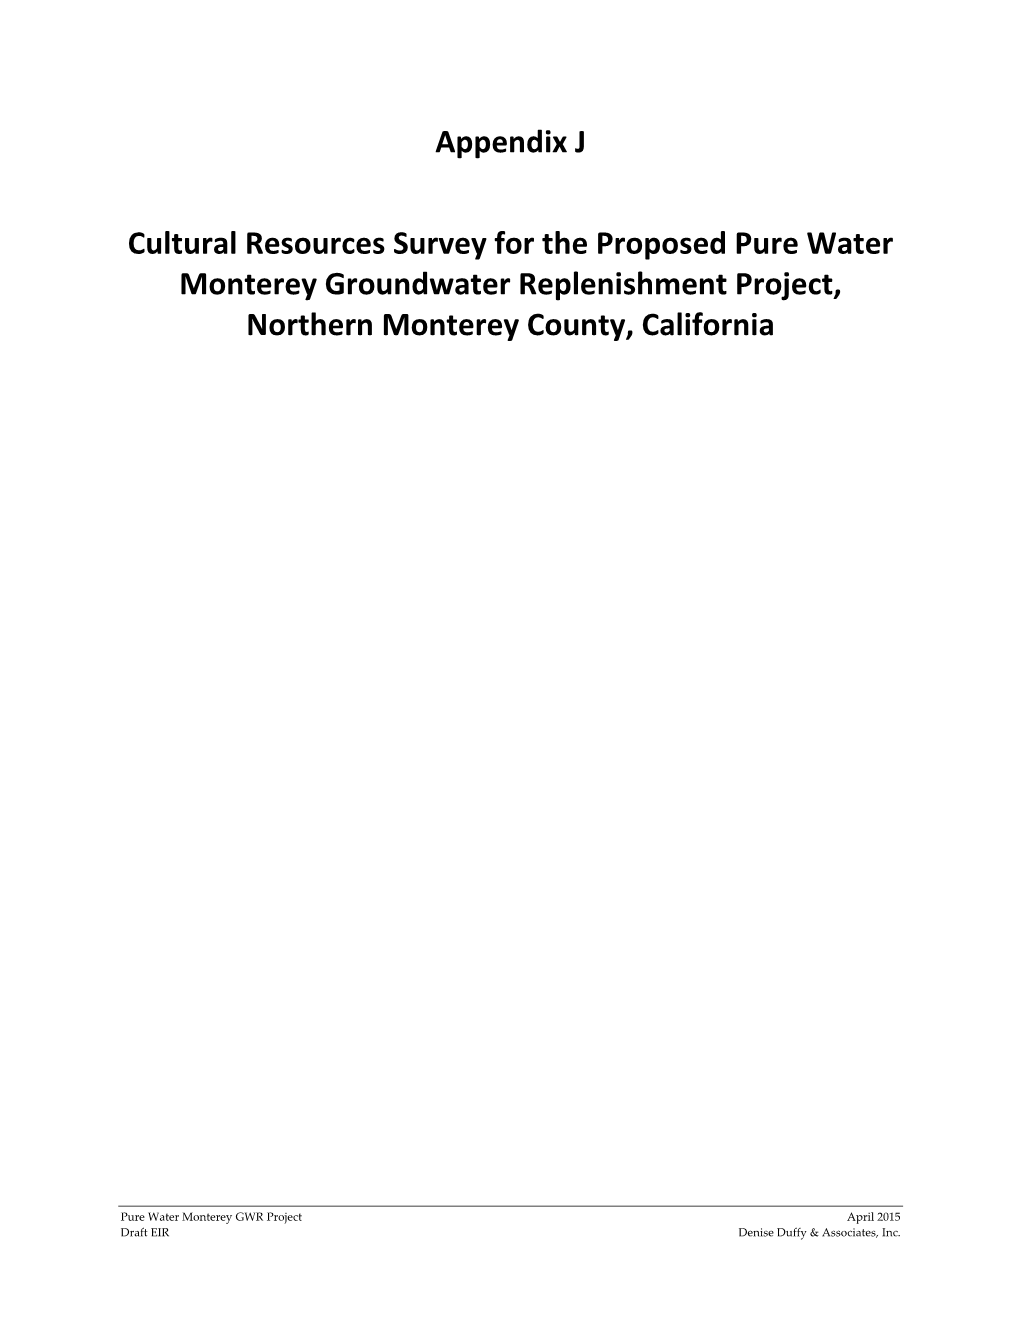 Appendix J Cultural Resources Survey for the Proposed Pure Water